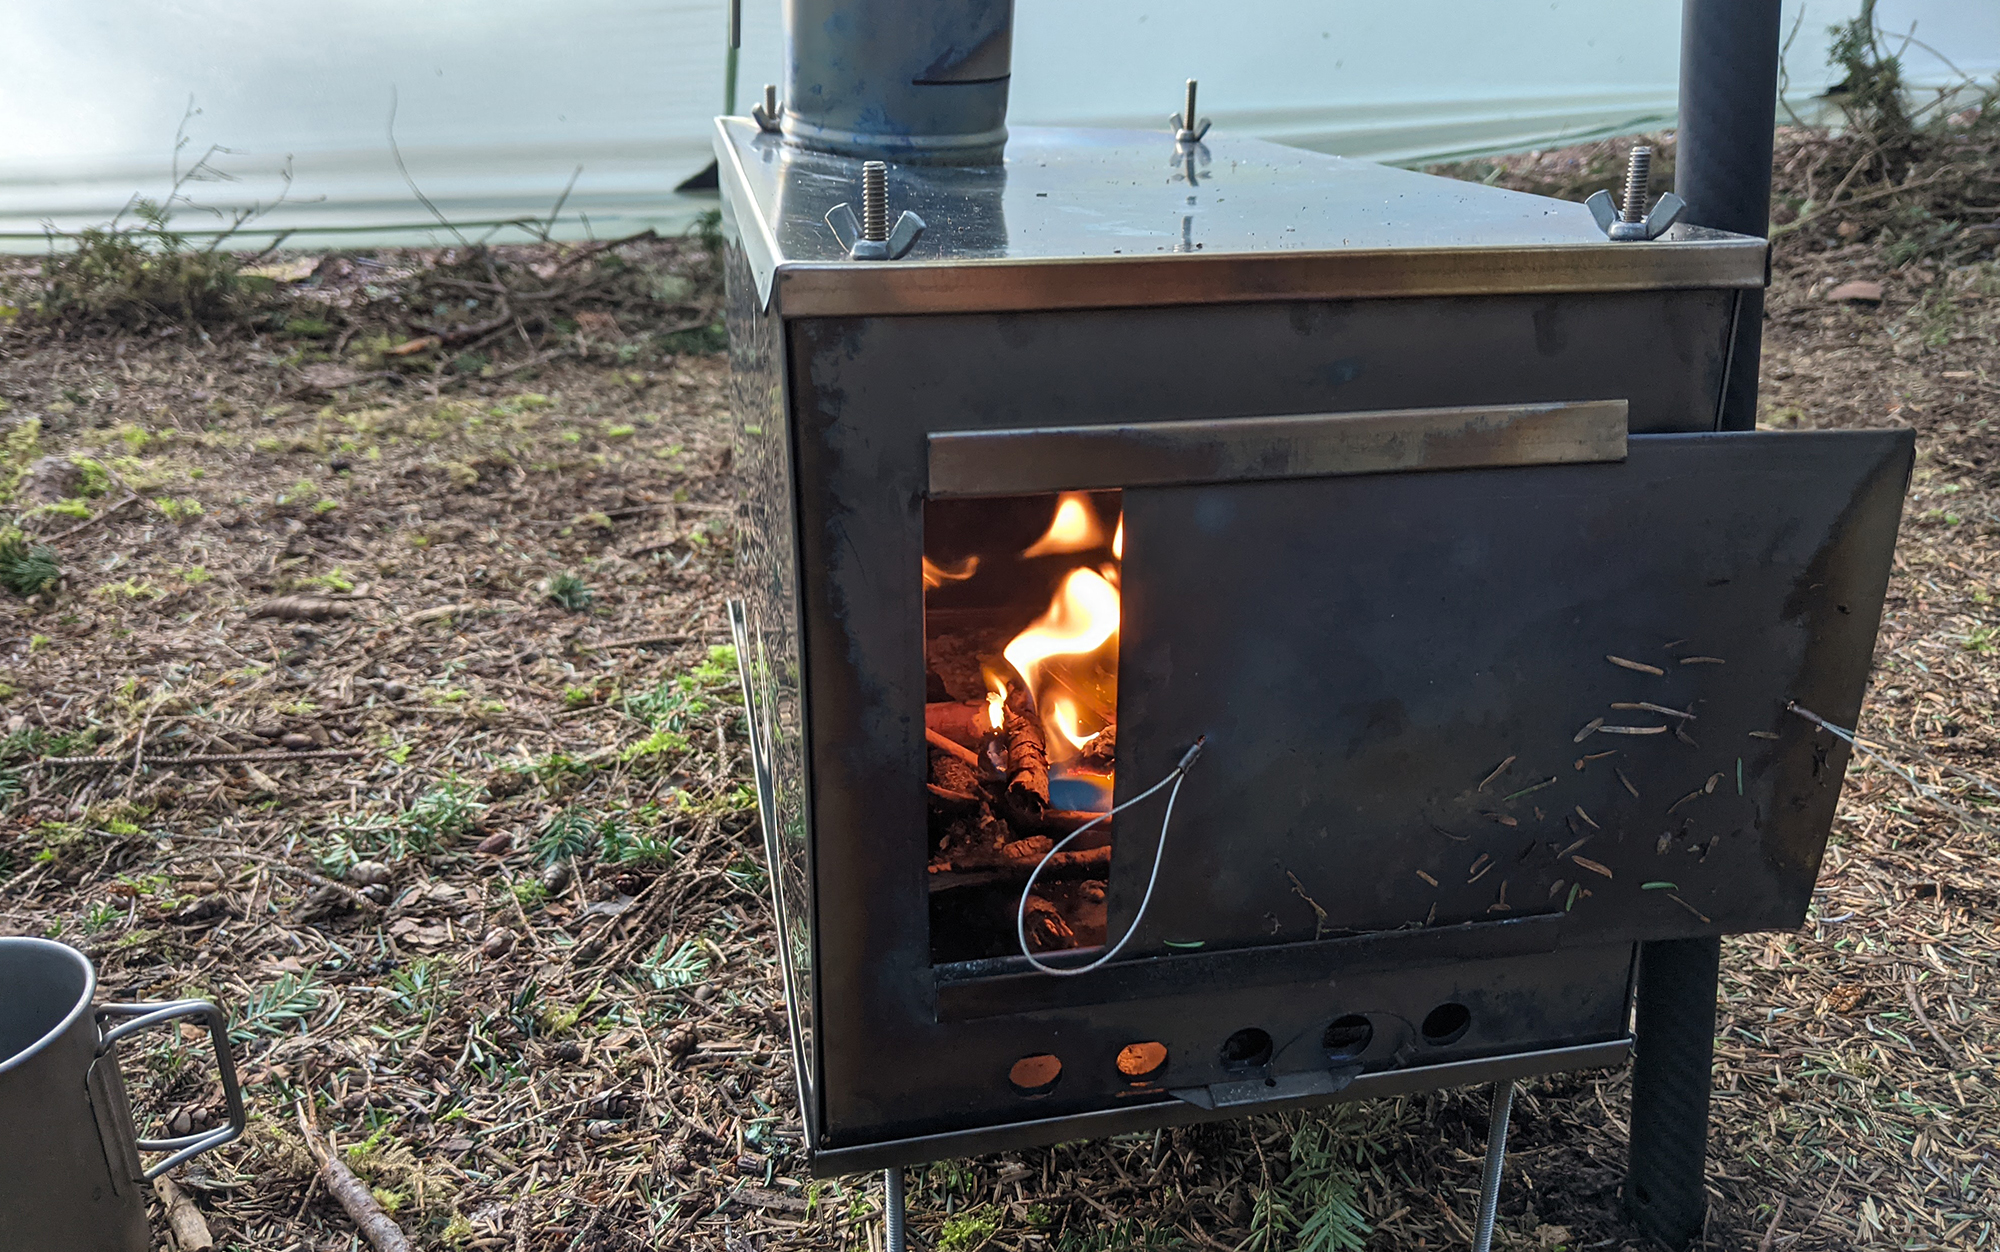 A Seek Outside Cimarron shows that you can have a wood-burning stove as part of an ultralight setup.